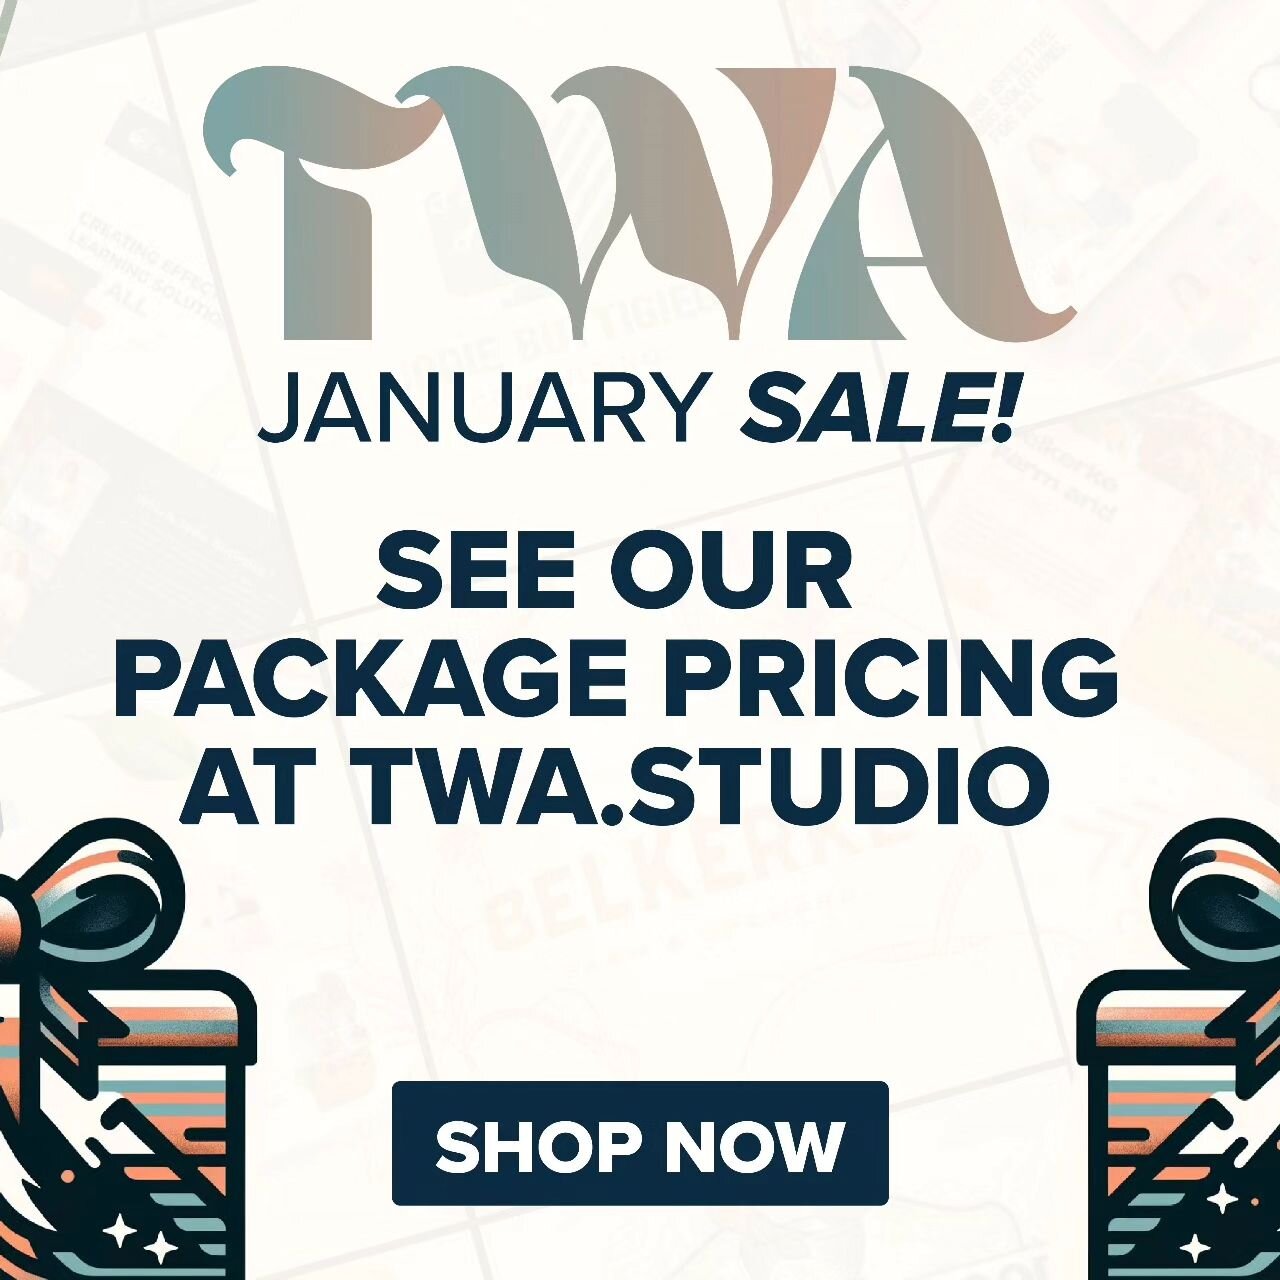 Unlock your brand's potential with TWA Studio's January Sale! Our expert design and development services are now more accessible than ever. Don't miss out on exceptional quality at irresistible prices. Your future awaits, and it looks incredible.

🔗